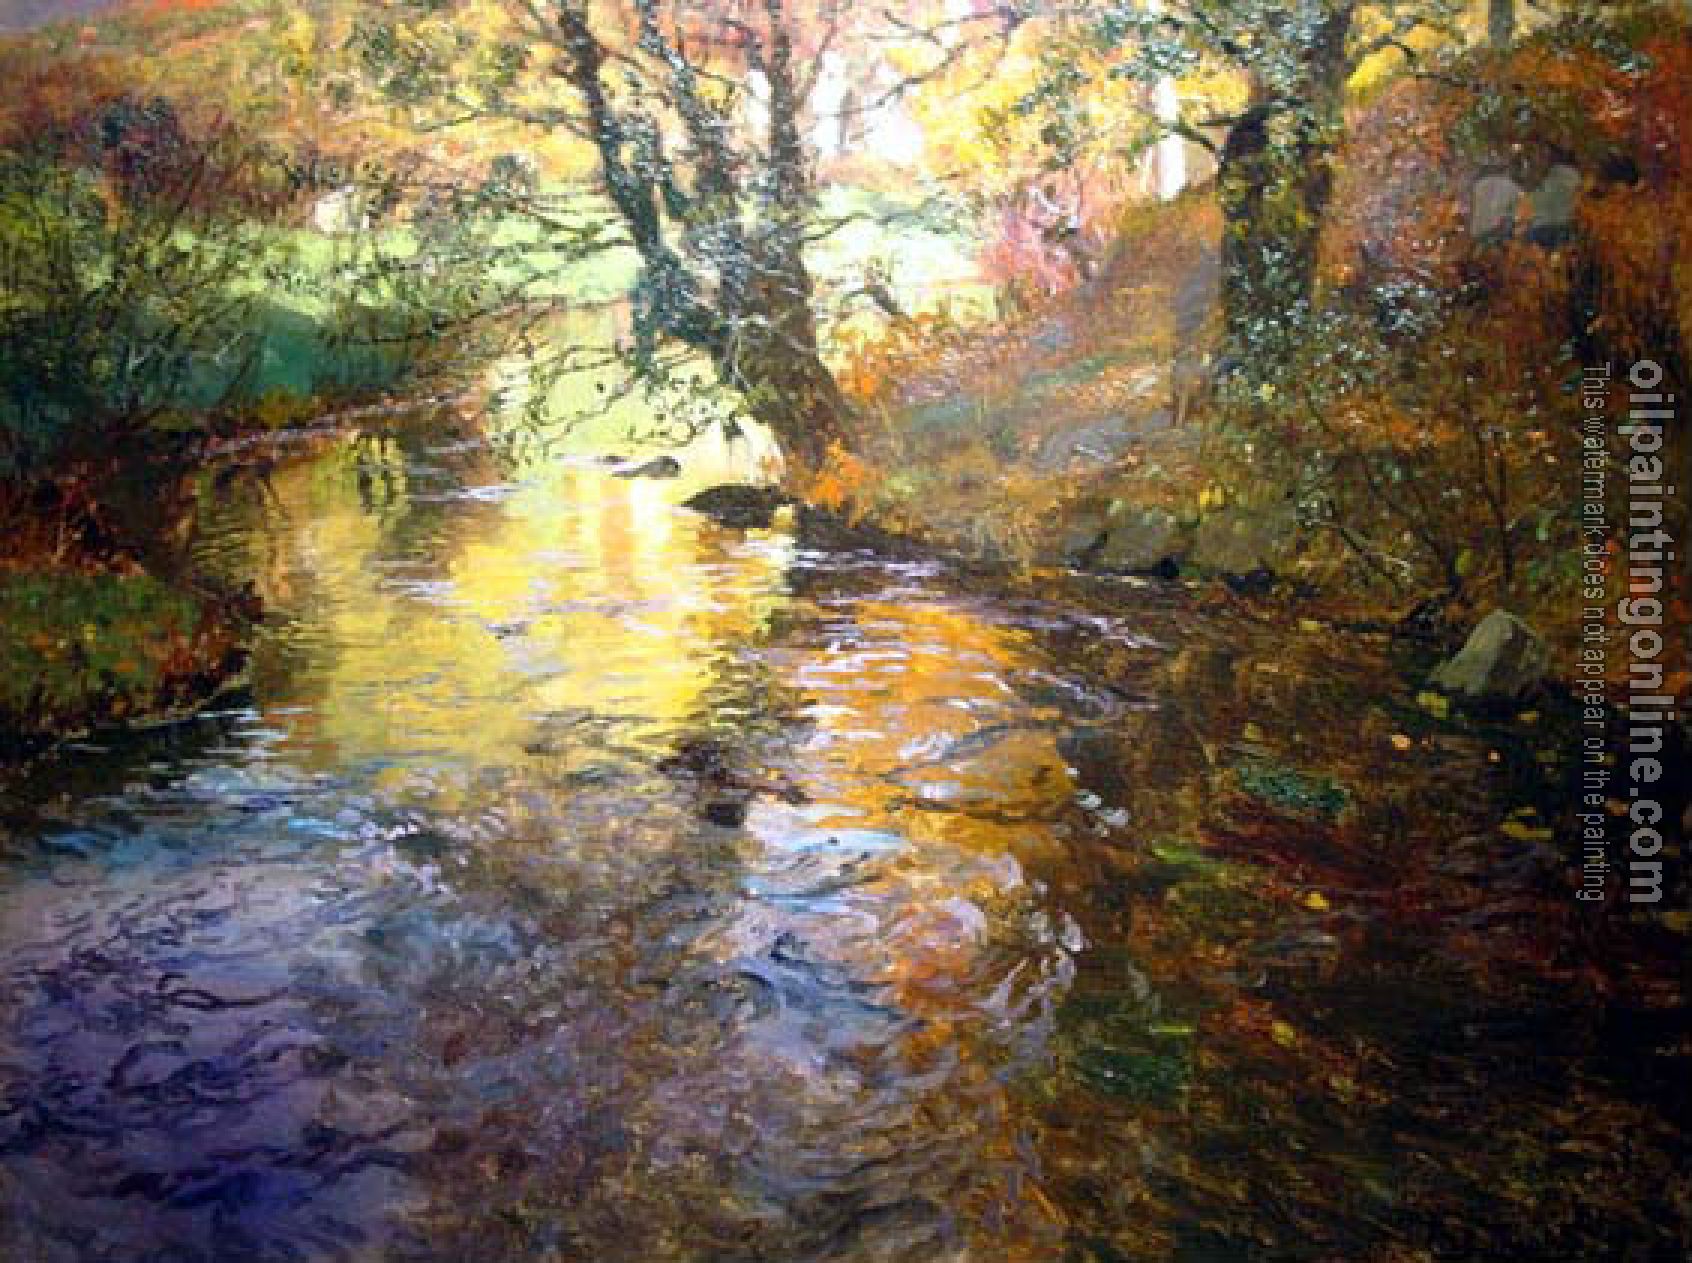 Thaulow, Frits - At Quimperle